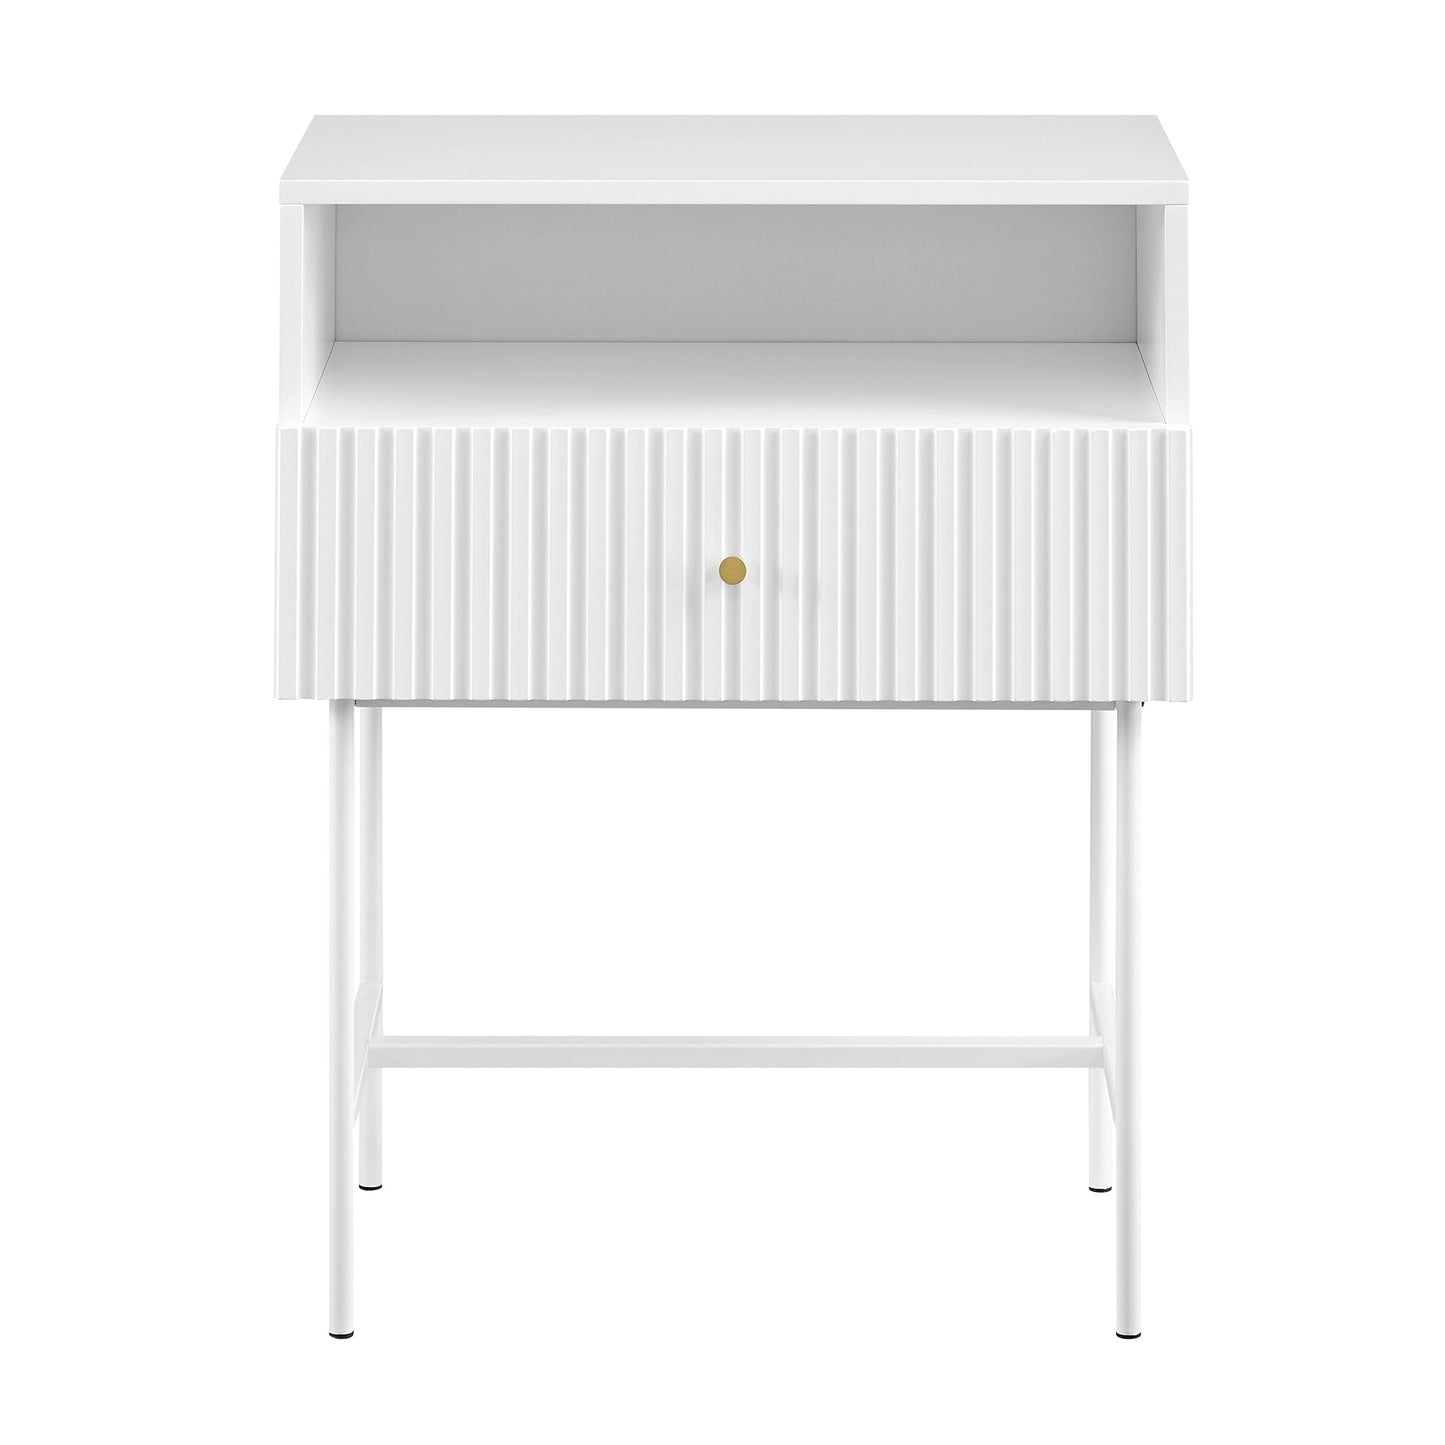 Lucia Slender Fluted Bedside Table in White